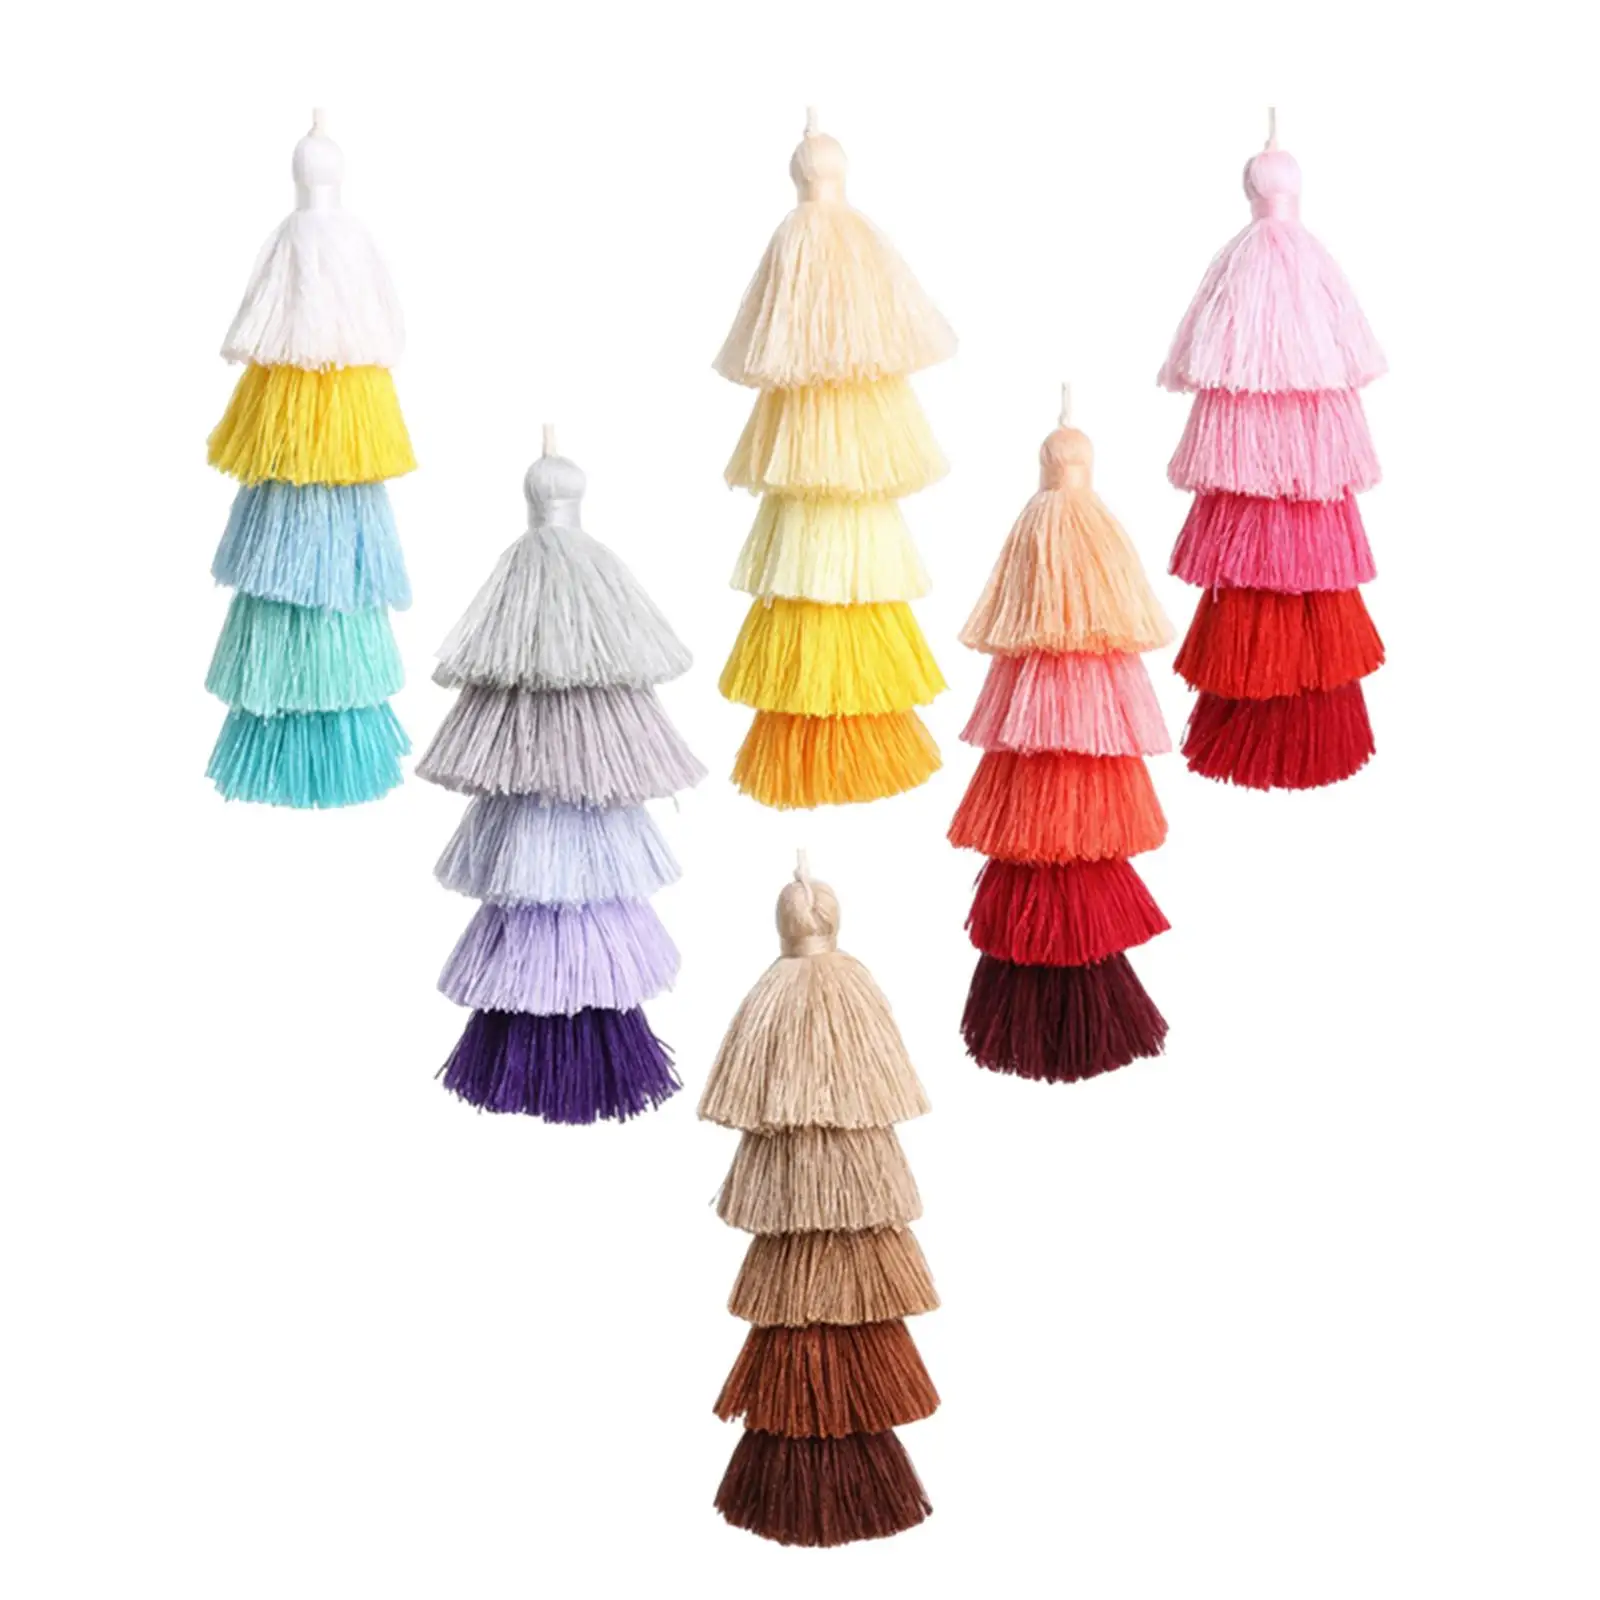 6 Pieces Colorful Bohemian Pompom Tassel Key Chain Key Ring Pendant Bookmarks Girls Decor Fringe for Jewelry Making Accessory